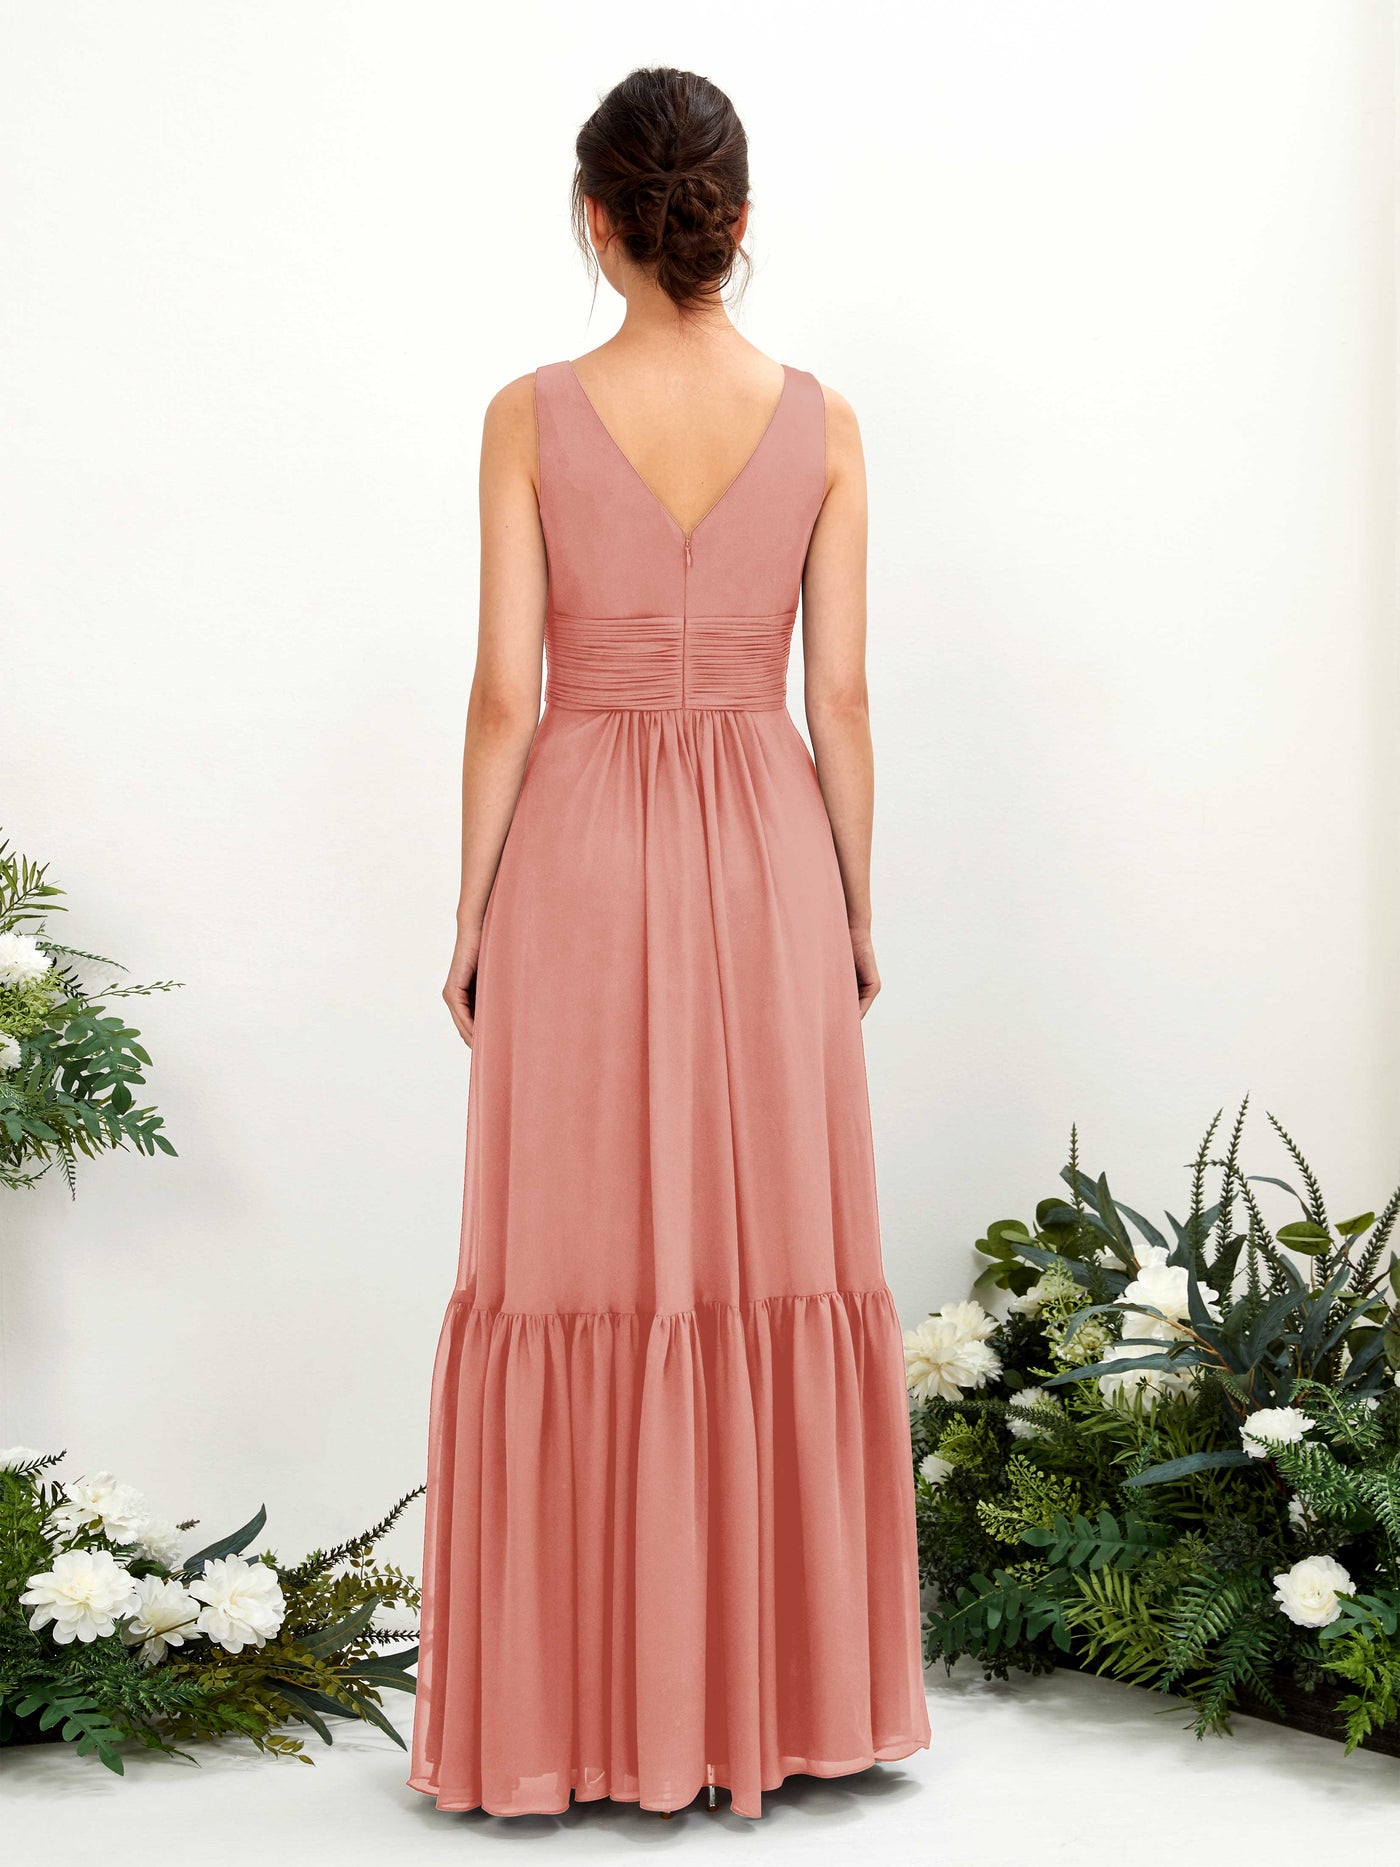 Champagne Rose Bridesmaid Dresses Bridesmaid Dress A-line Chiffon Straps Full Length Sleeveless Wedding Party Dress (80223706)#color_champagne-rose